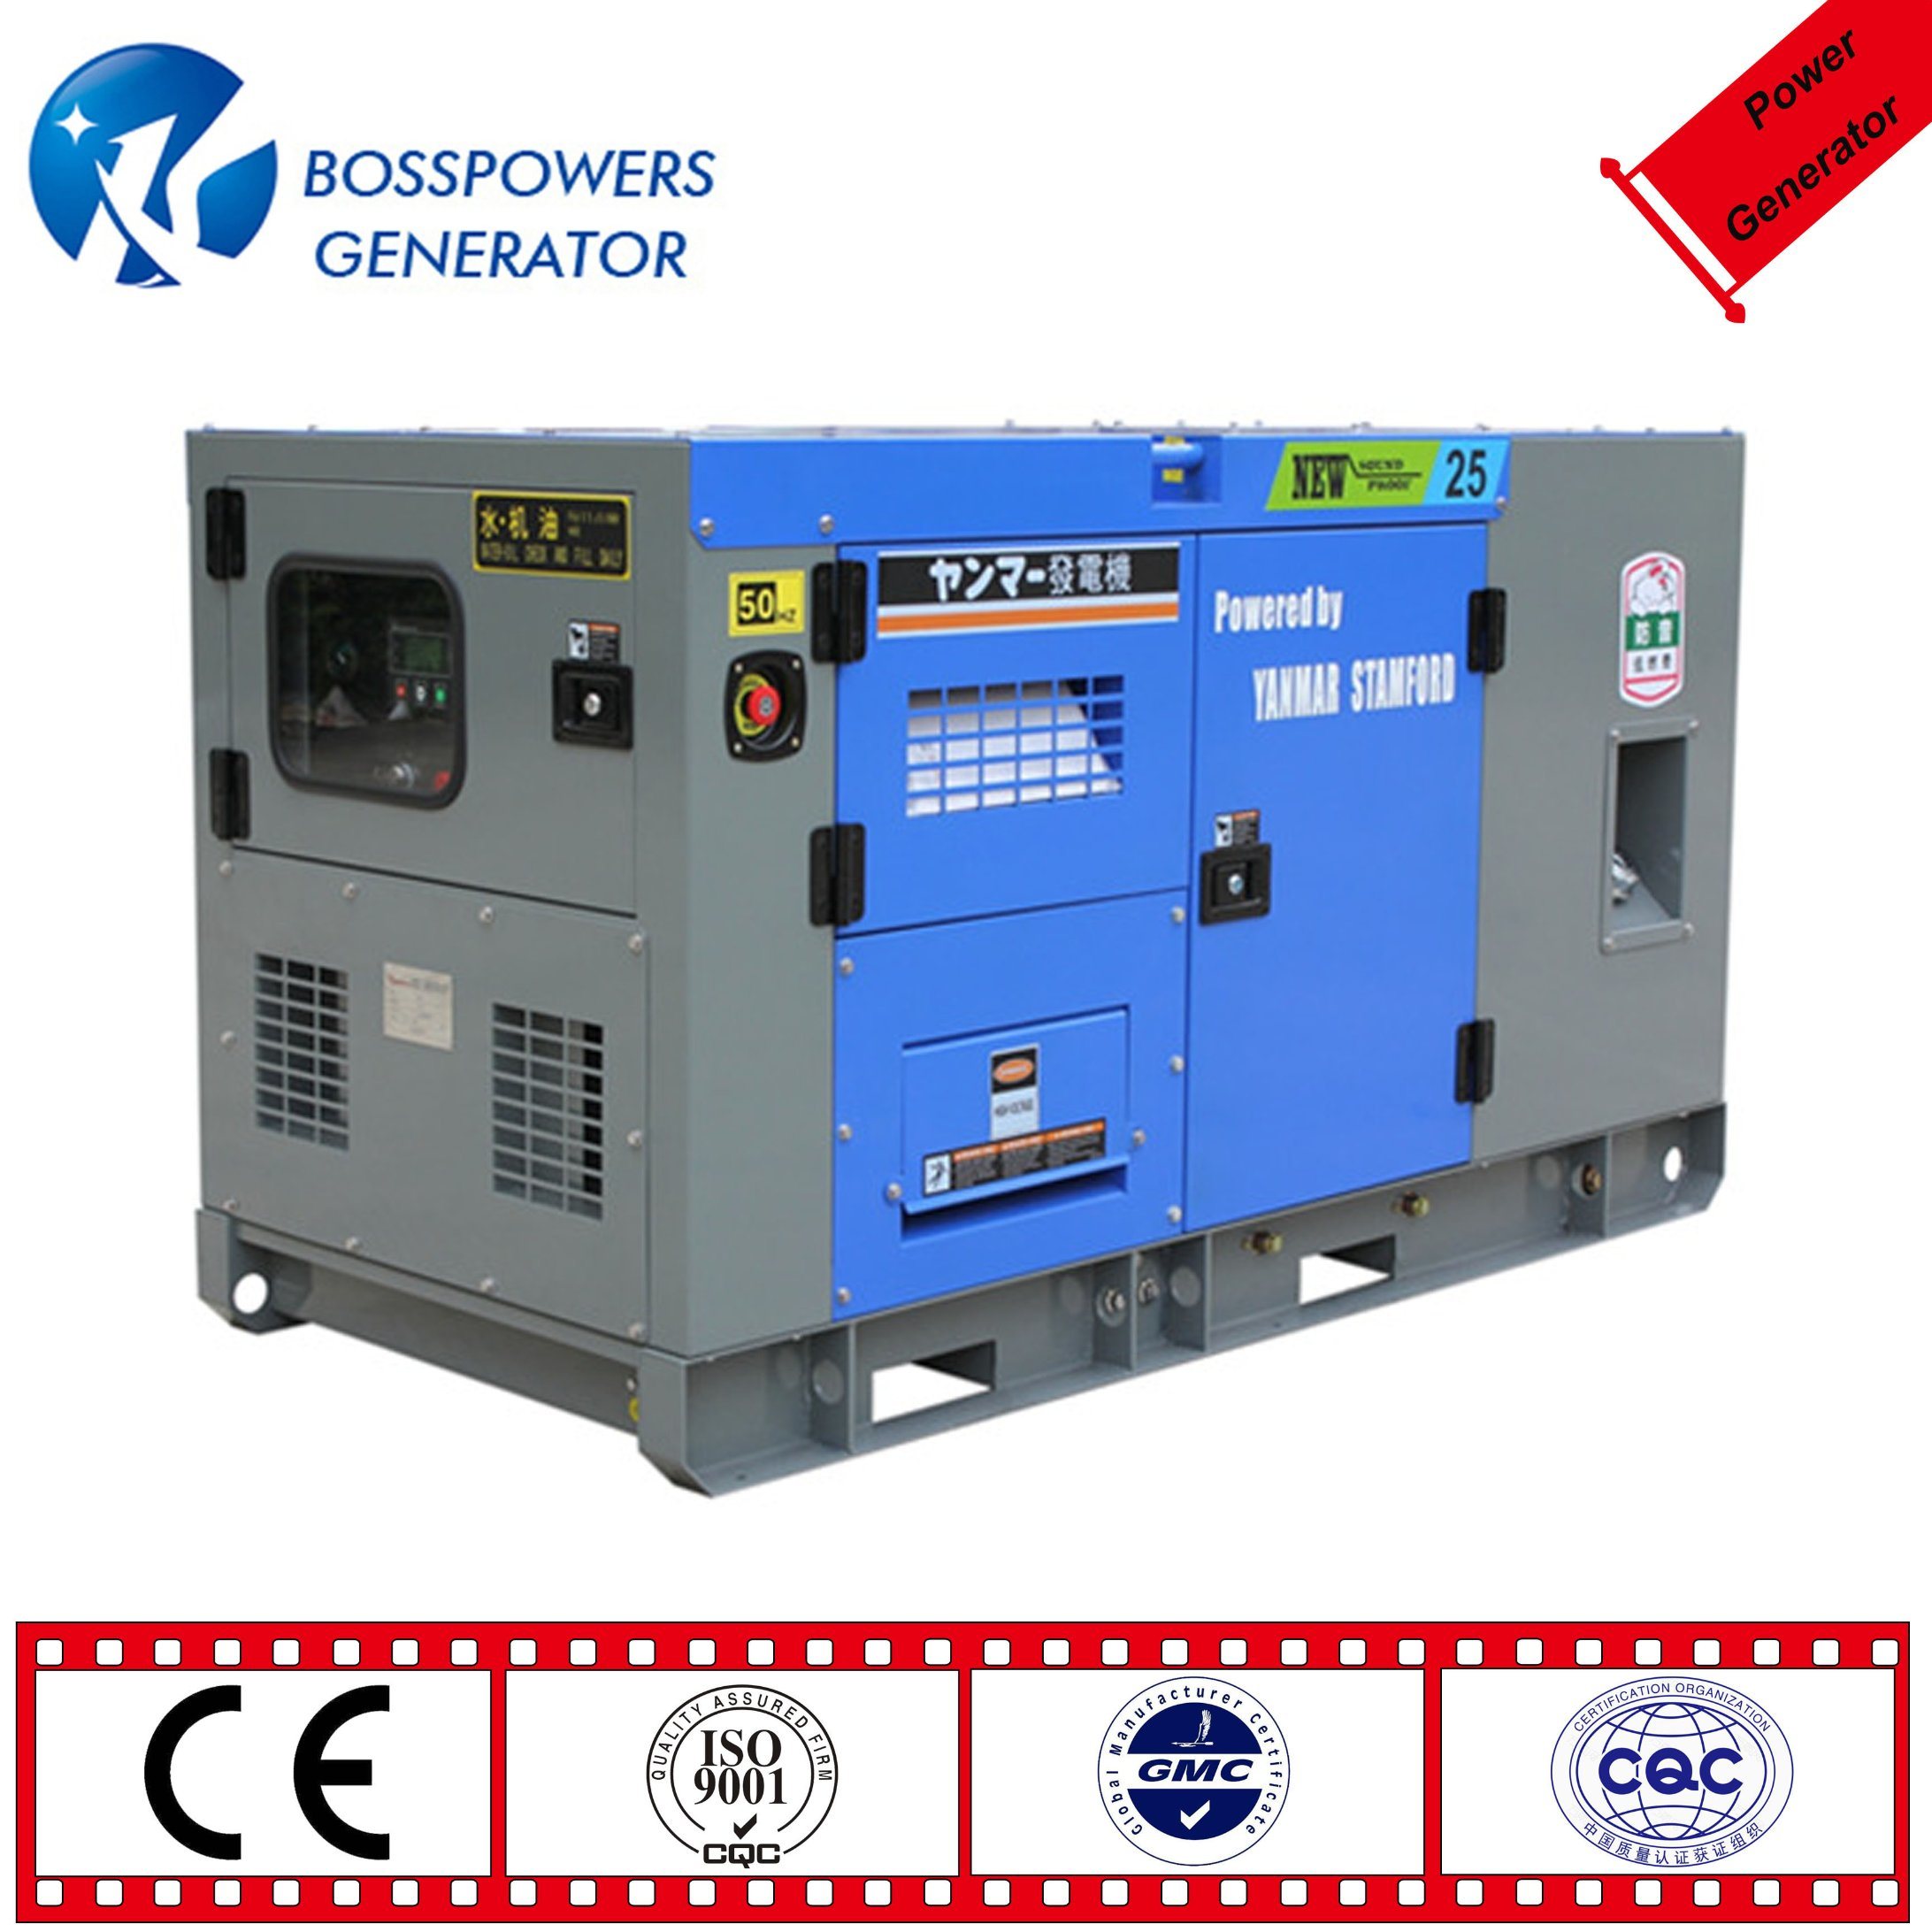 Ce ISO9001 Approved Diesel Power Generator Powered by Isuzu Engine 30kVA 50kVA 80kVA Diesel Power Generator